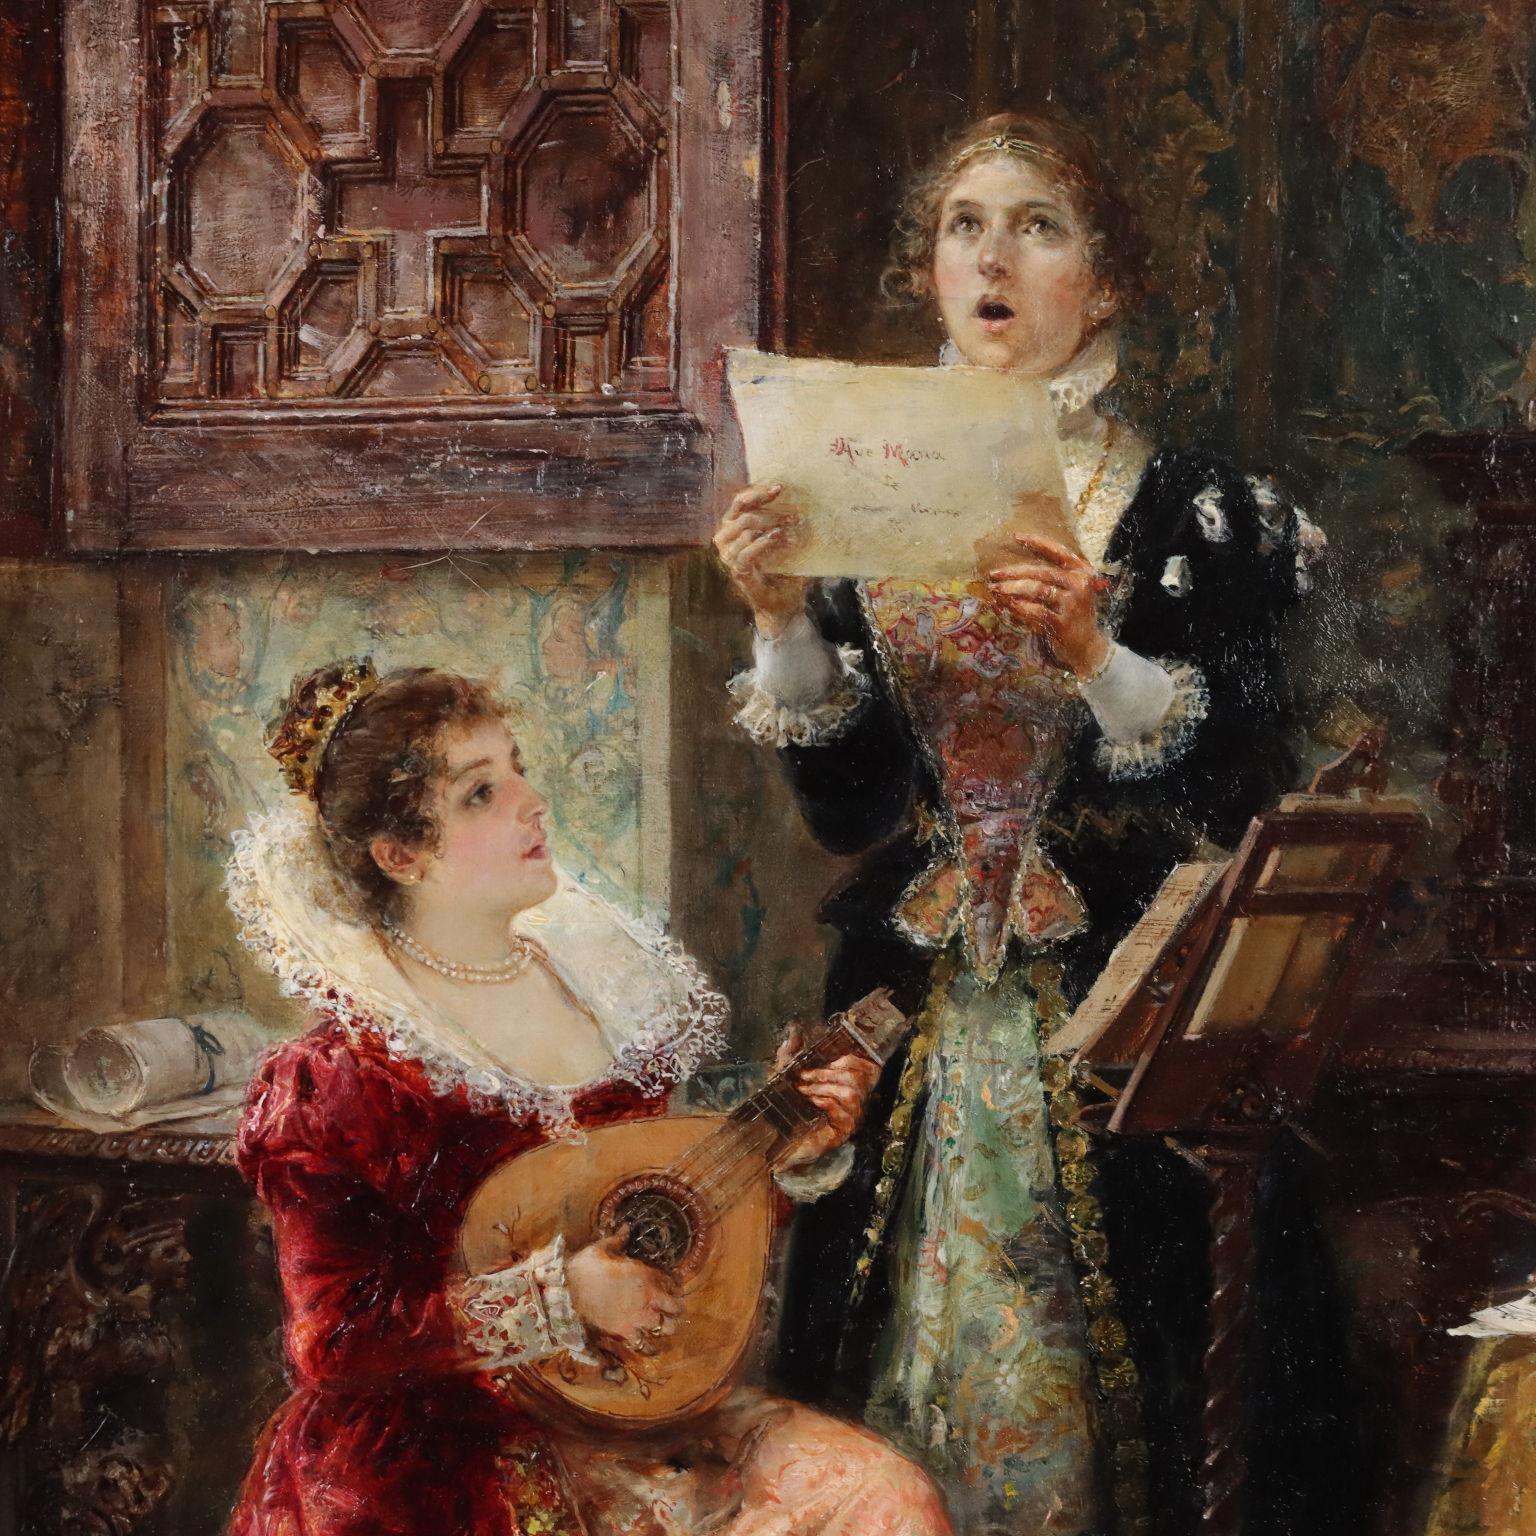 Il Concertino XIX secolo - Other Art Style Painting by Vicente March